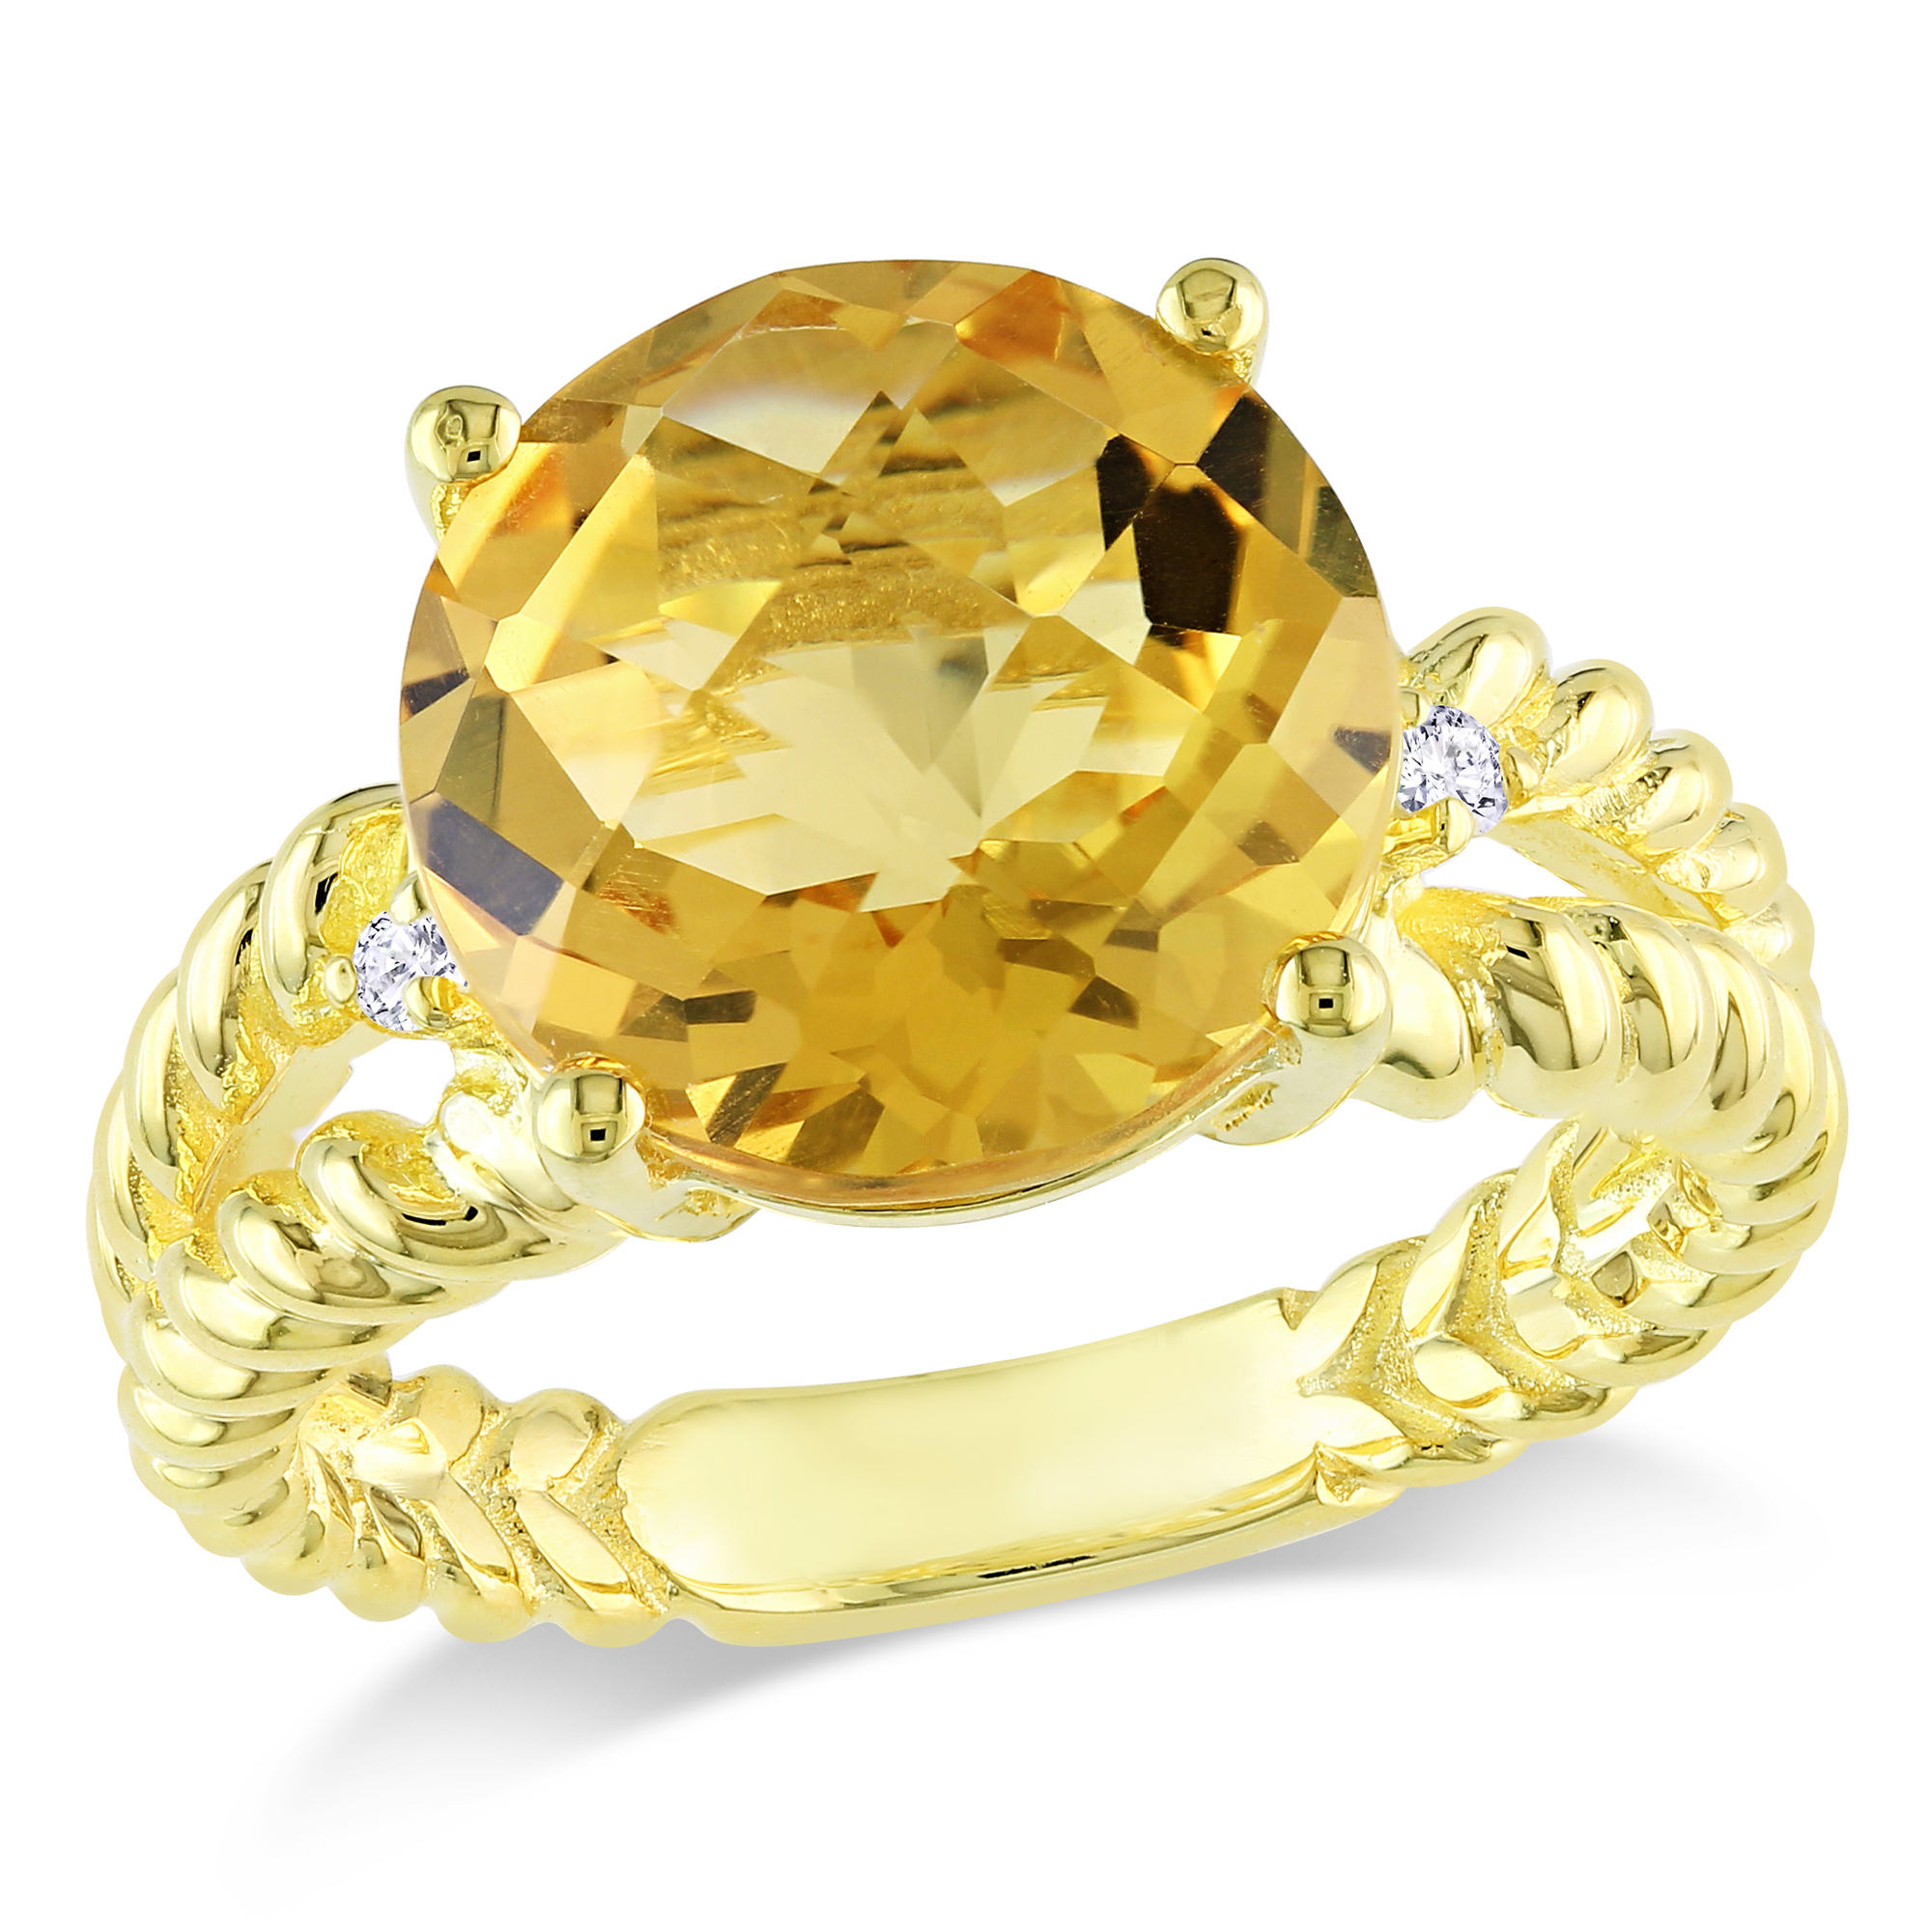 0.04 Carat T.W. Diamond and 5 3/4 Carat T.G.W. Citrine Fashion Ring in Gold Plated Sterling Silver GH I3